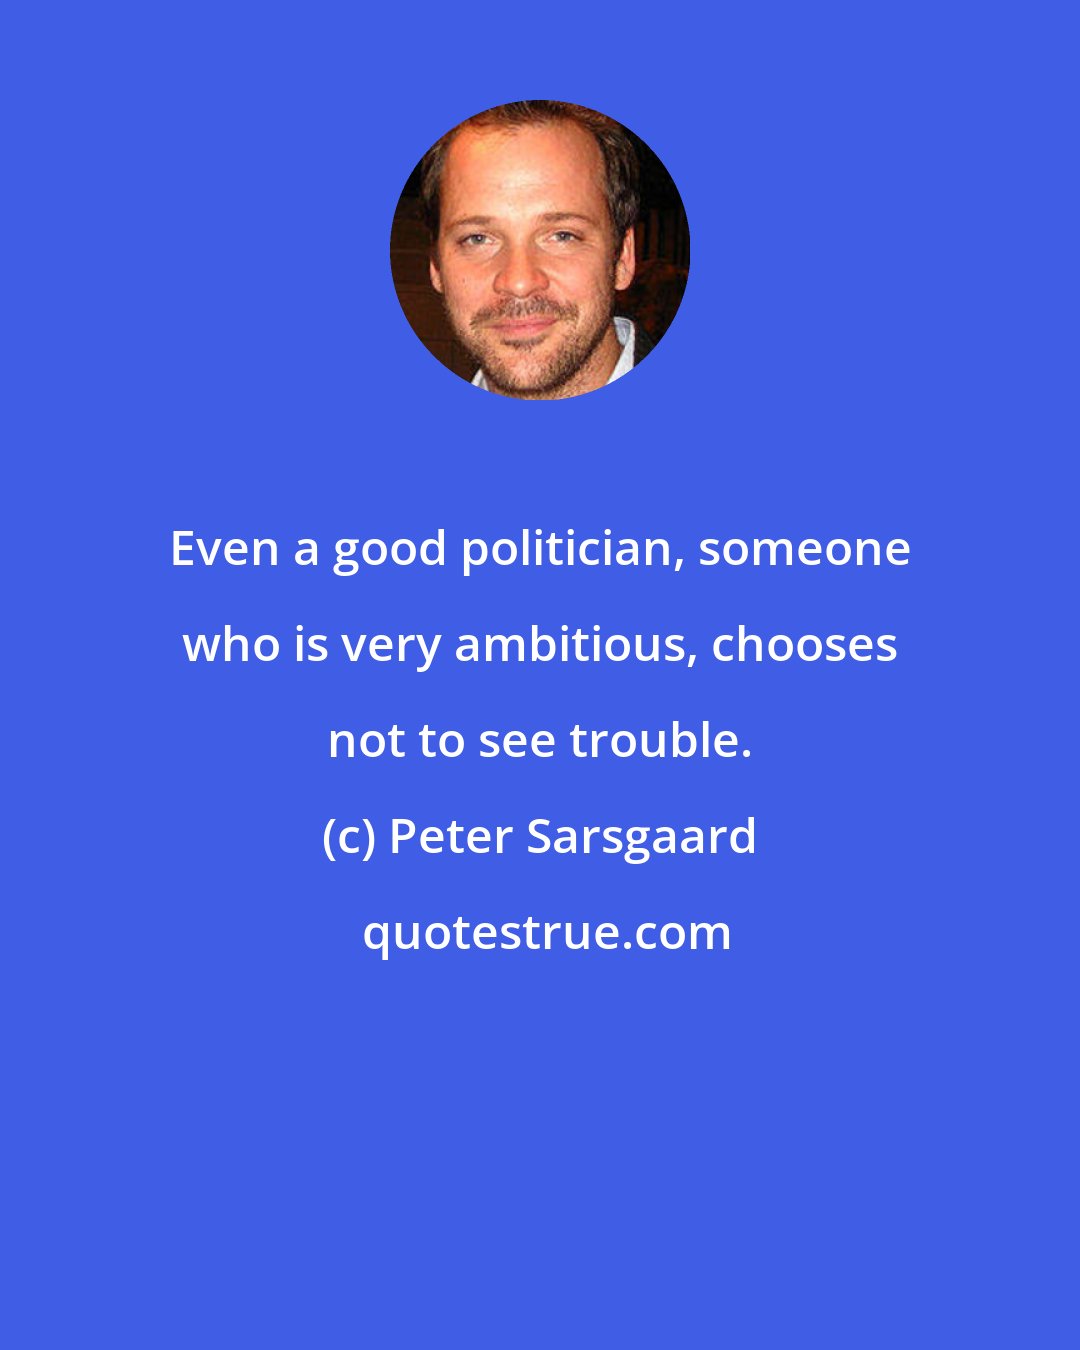 Peter Sarsgaard: Even a good politician, someone who is very ambitious, chooses not to see trouble.